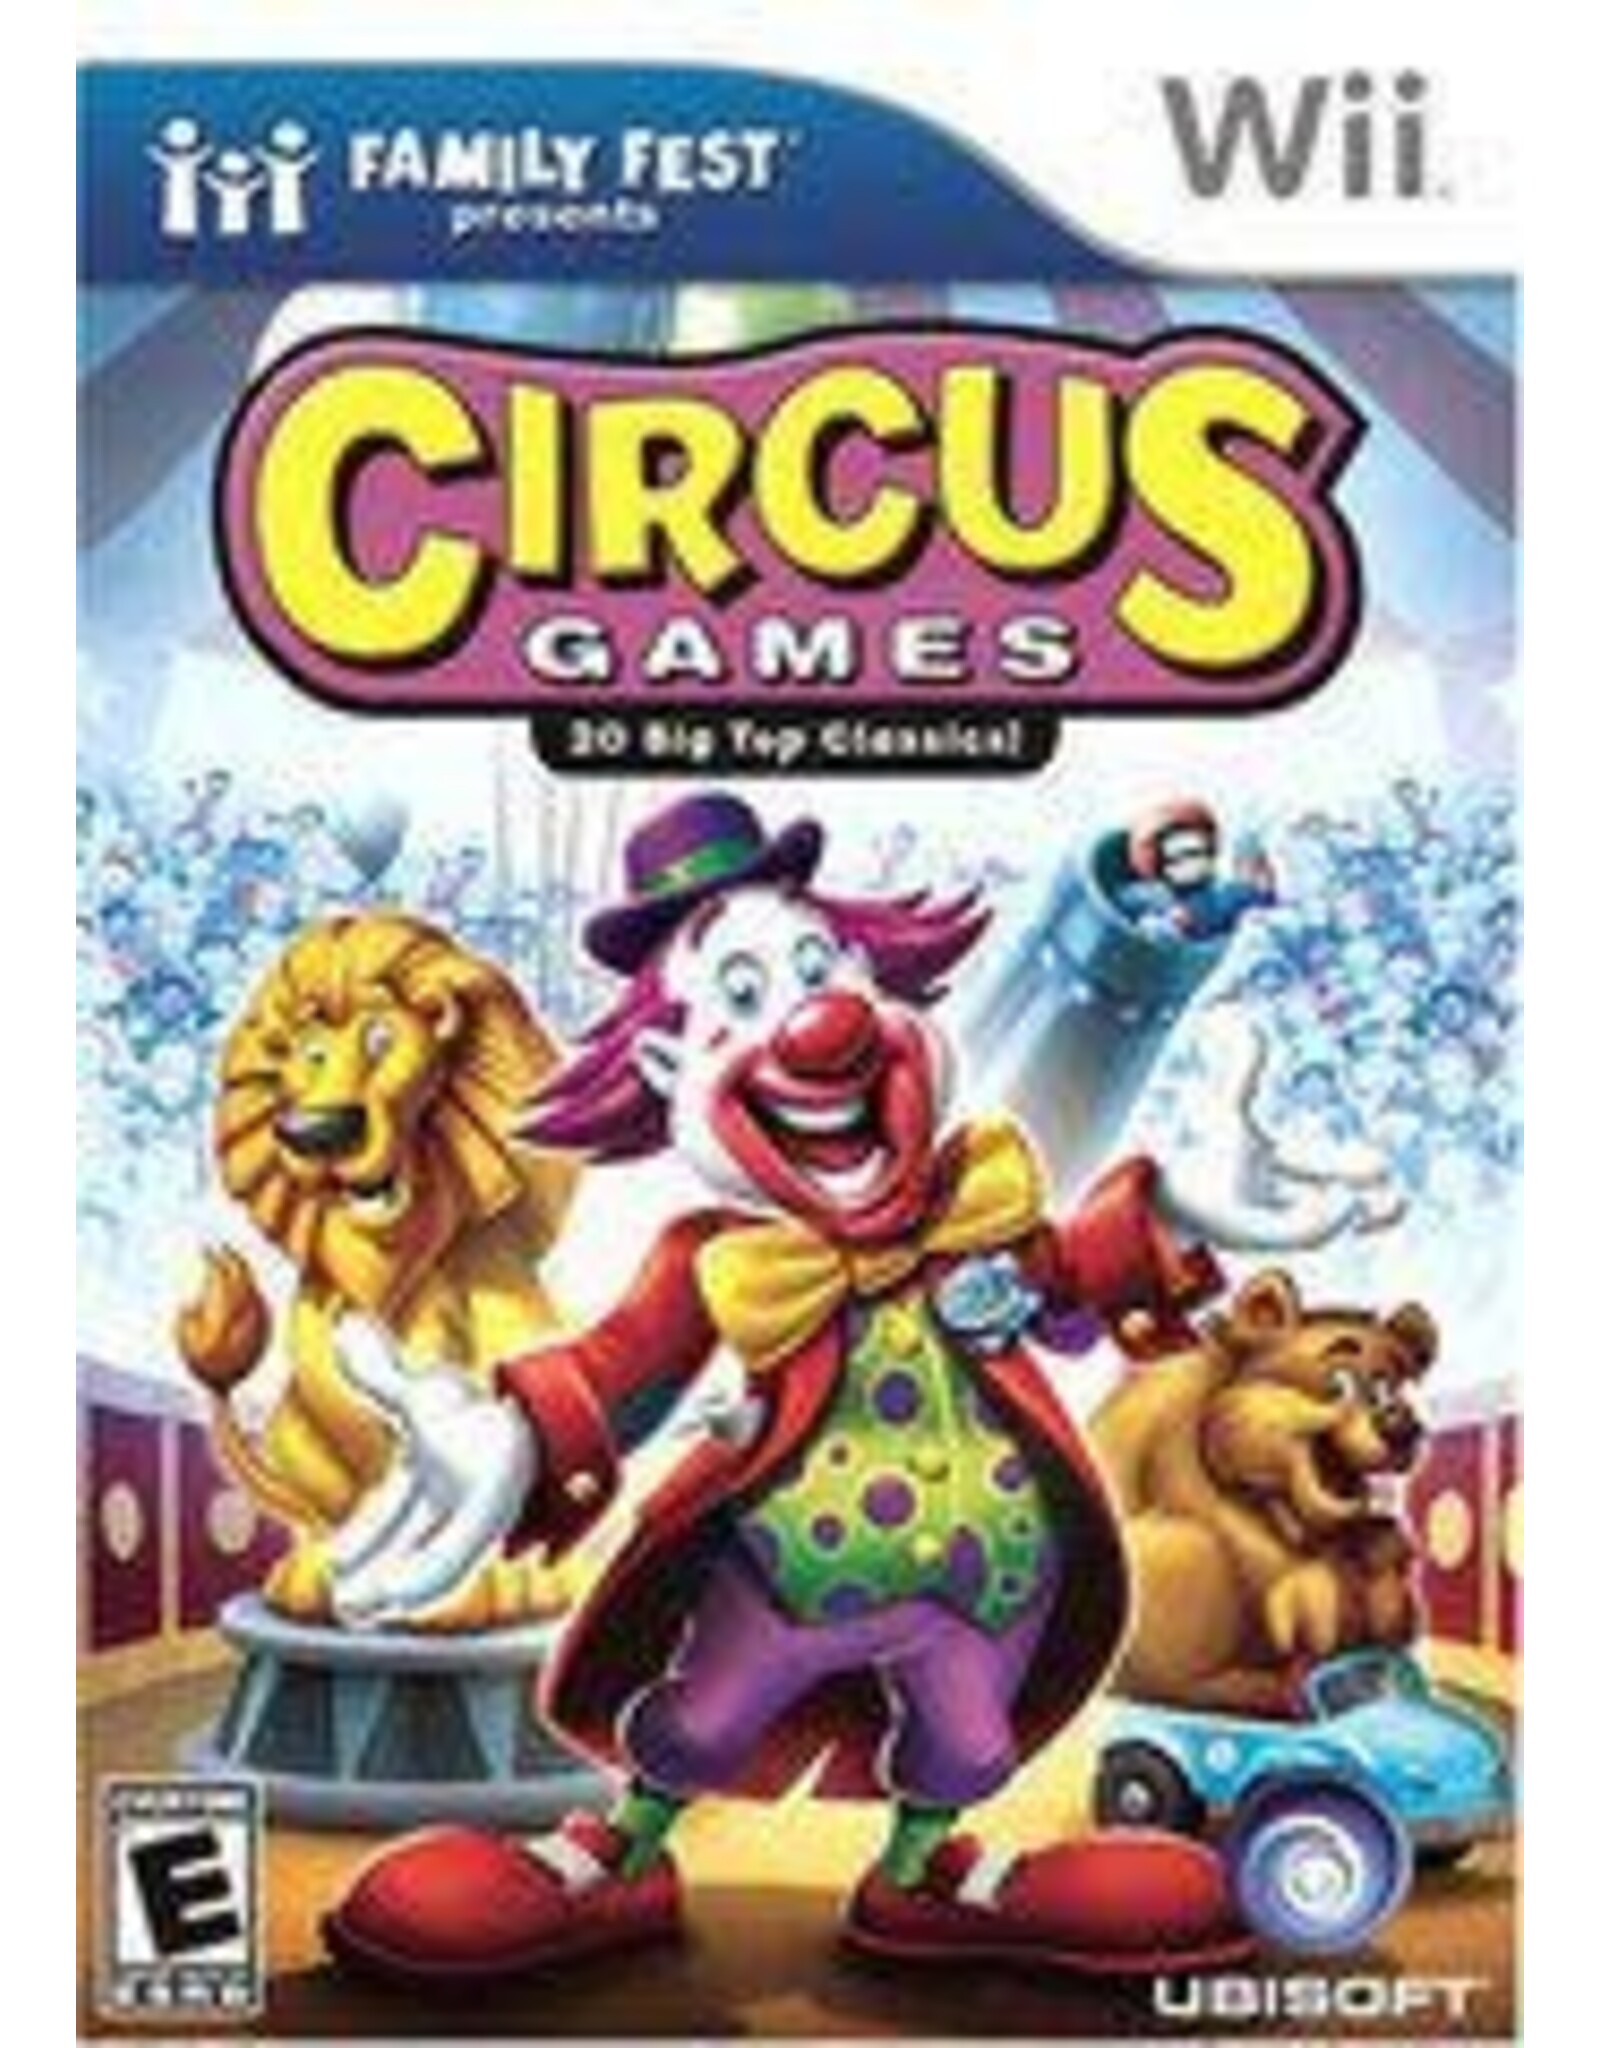 Wii Family Fest Presents: Circus Games (Used, No Manual)